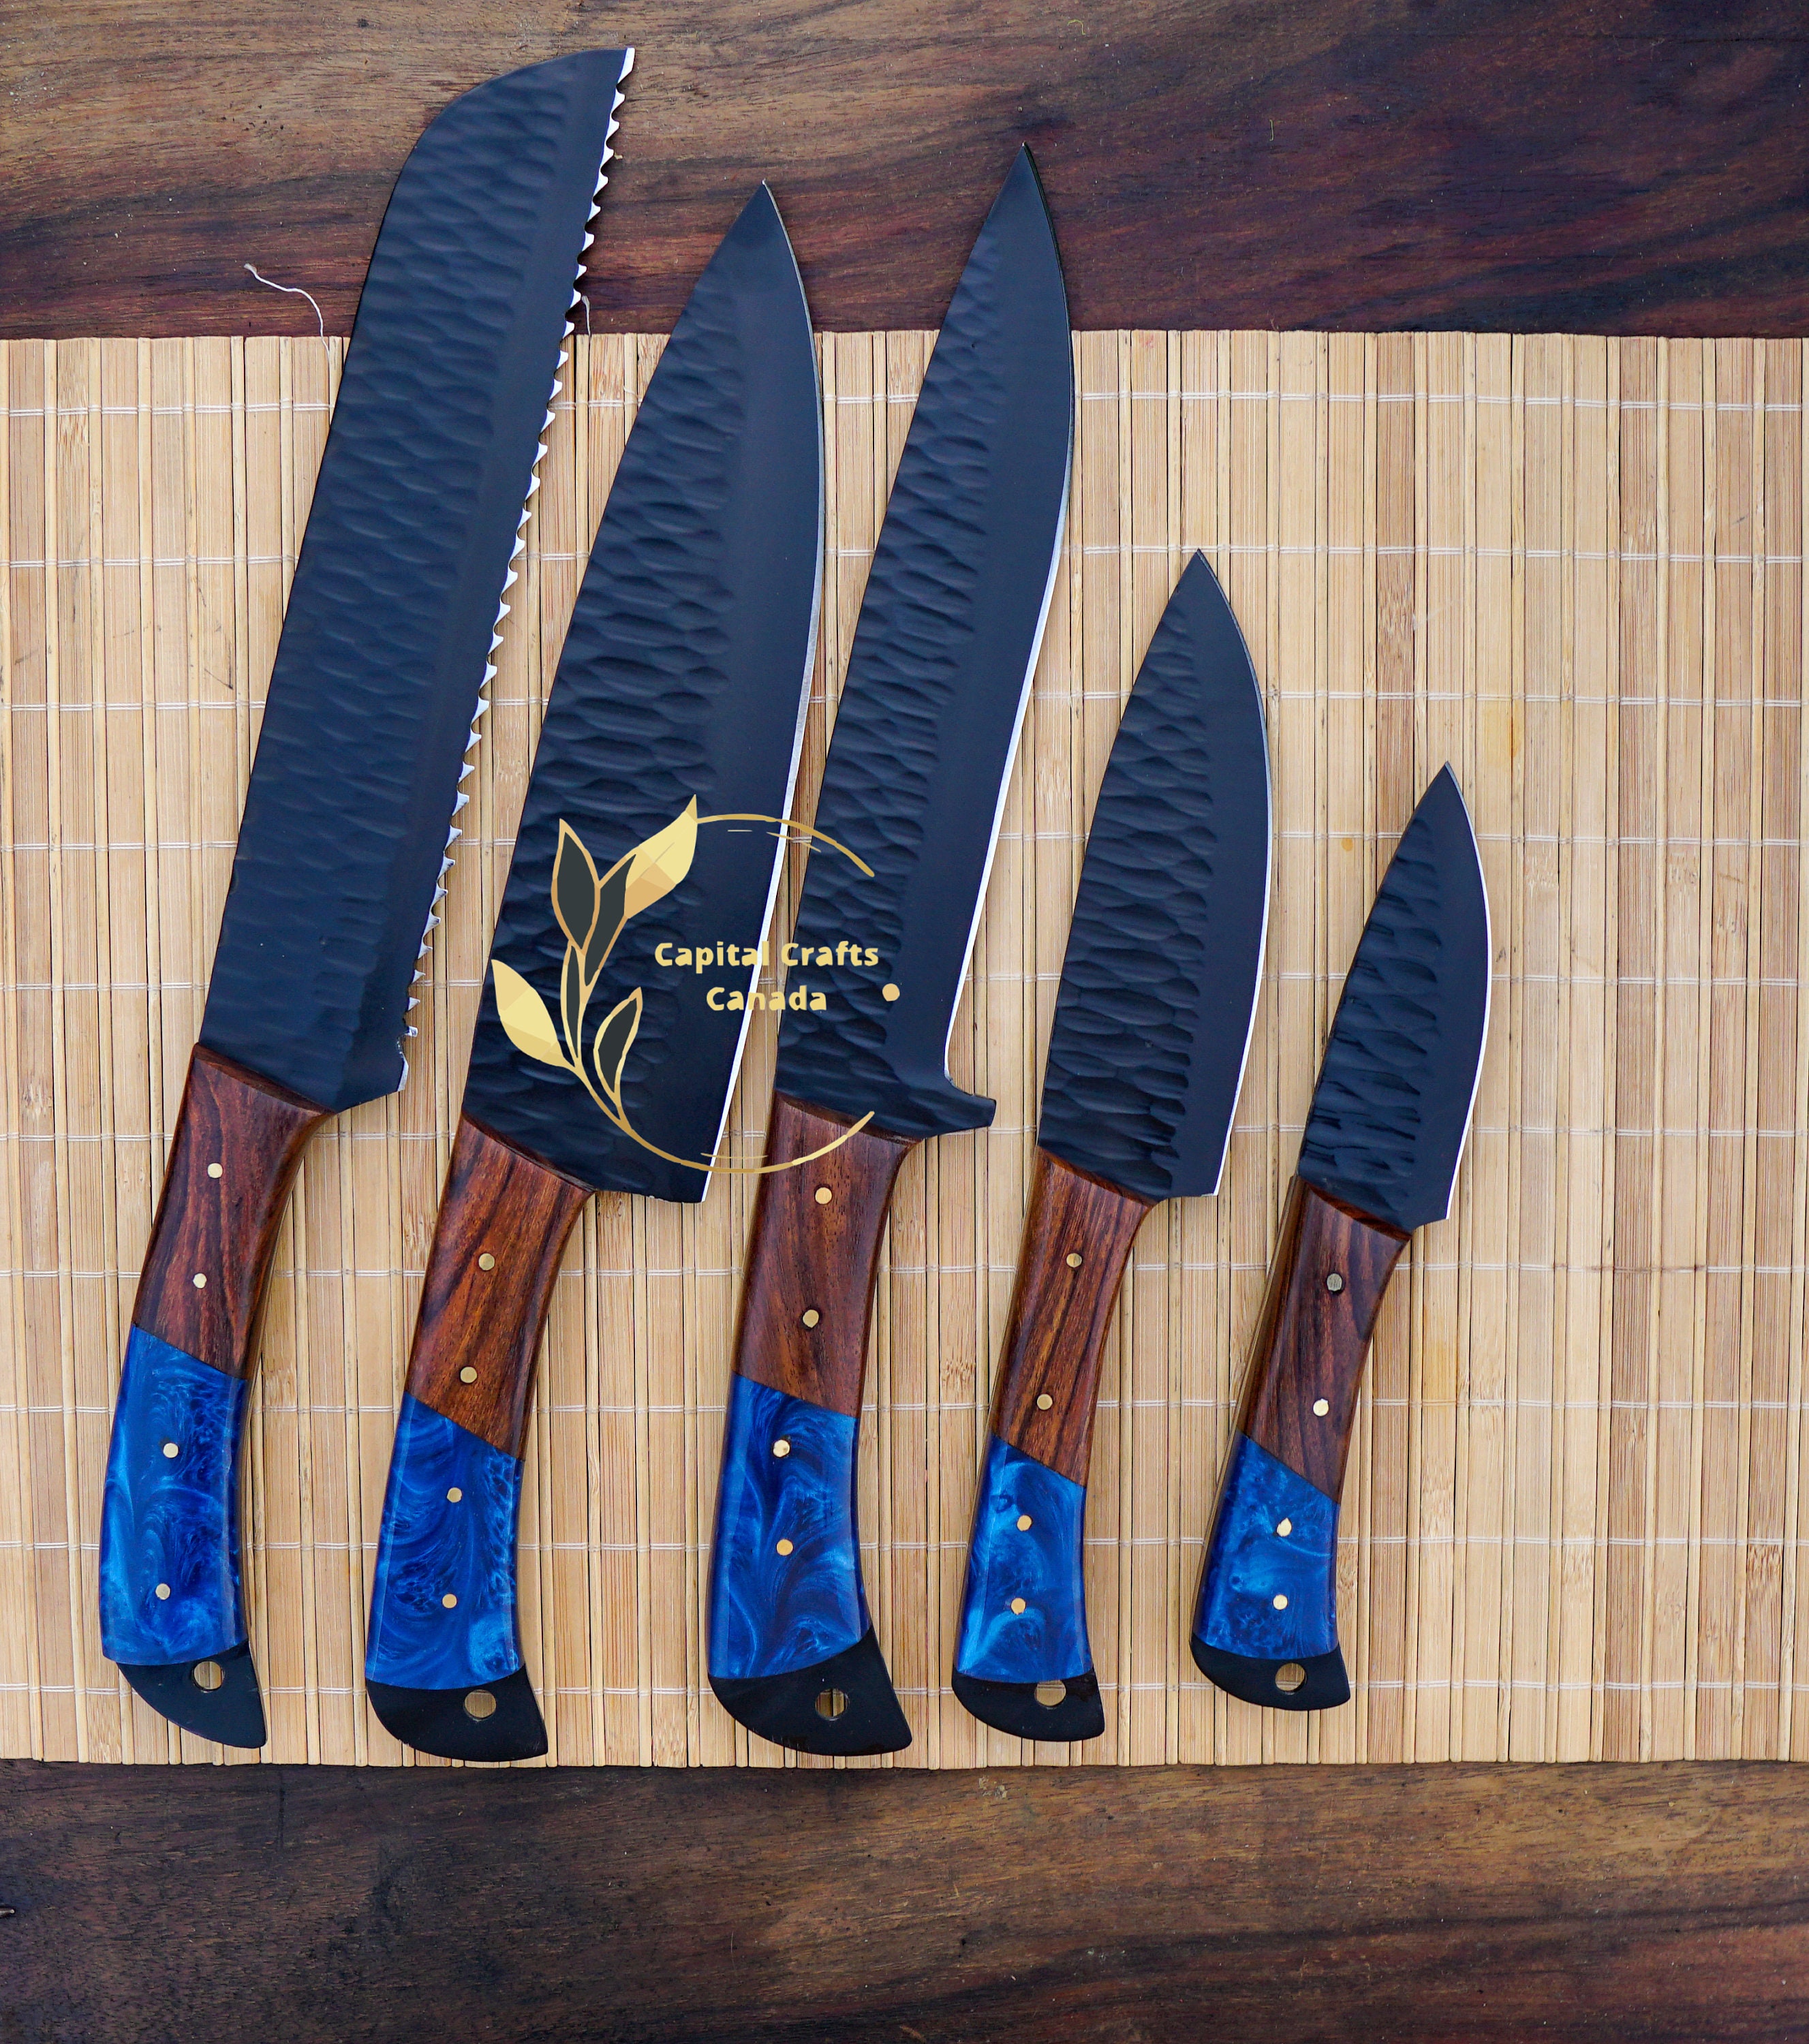 Custom Made Damascus Steel Fixed Blades Chef knives Set With